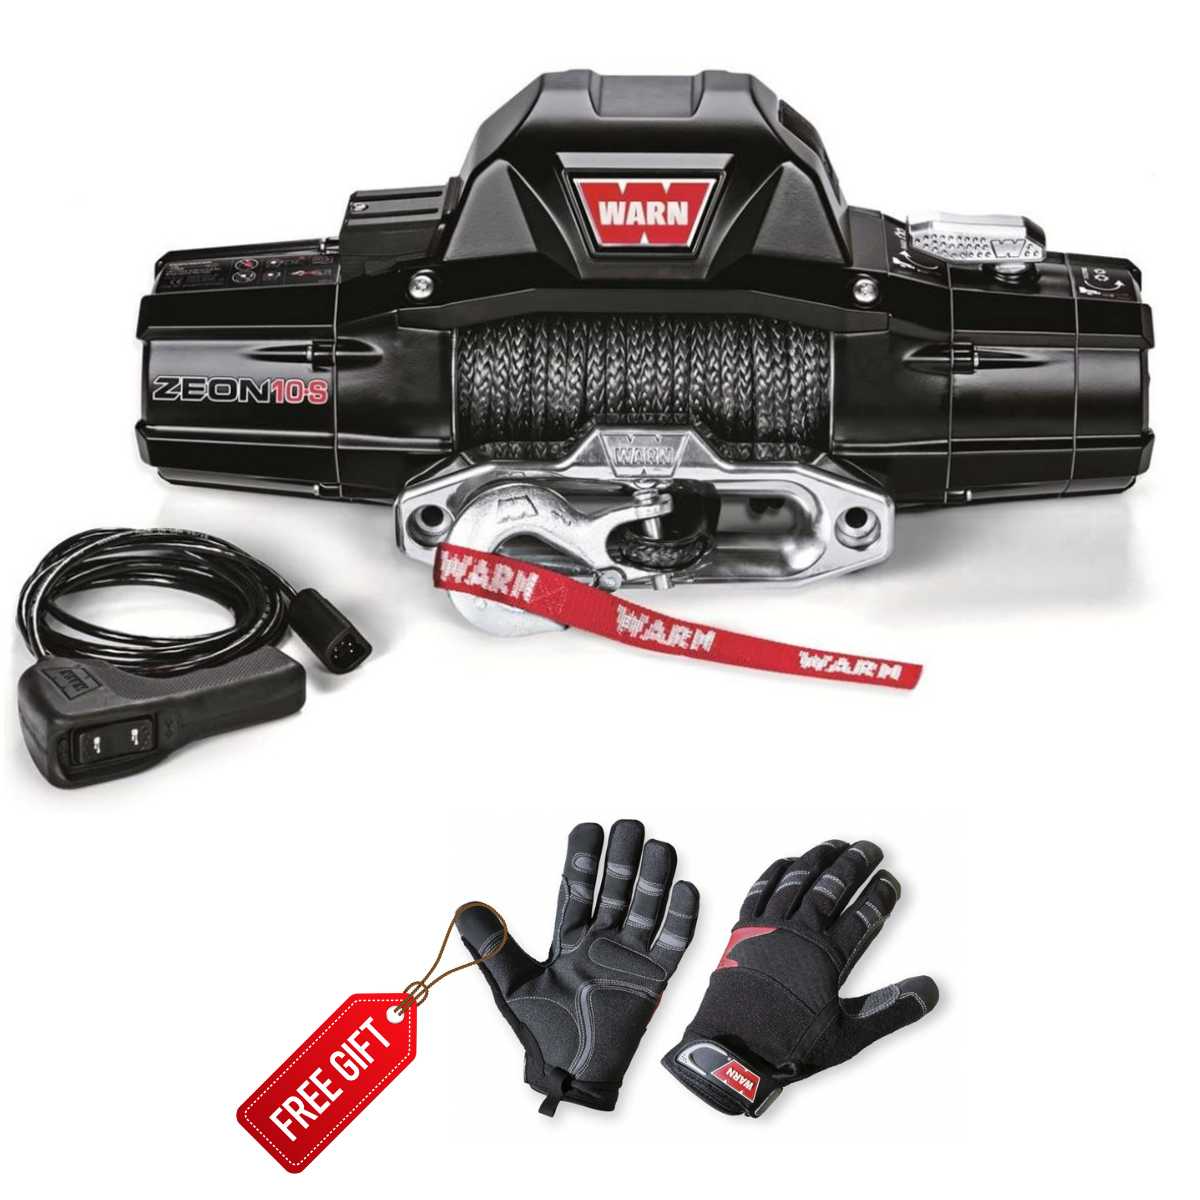 WARN ZEON 10-S 10,000lbs 12V Winch - Synthetic Rope